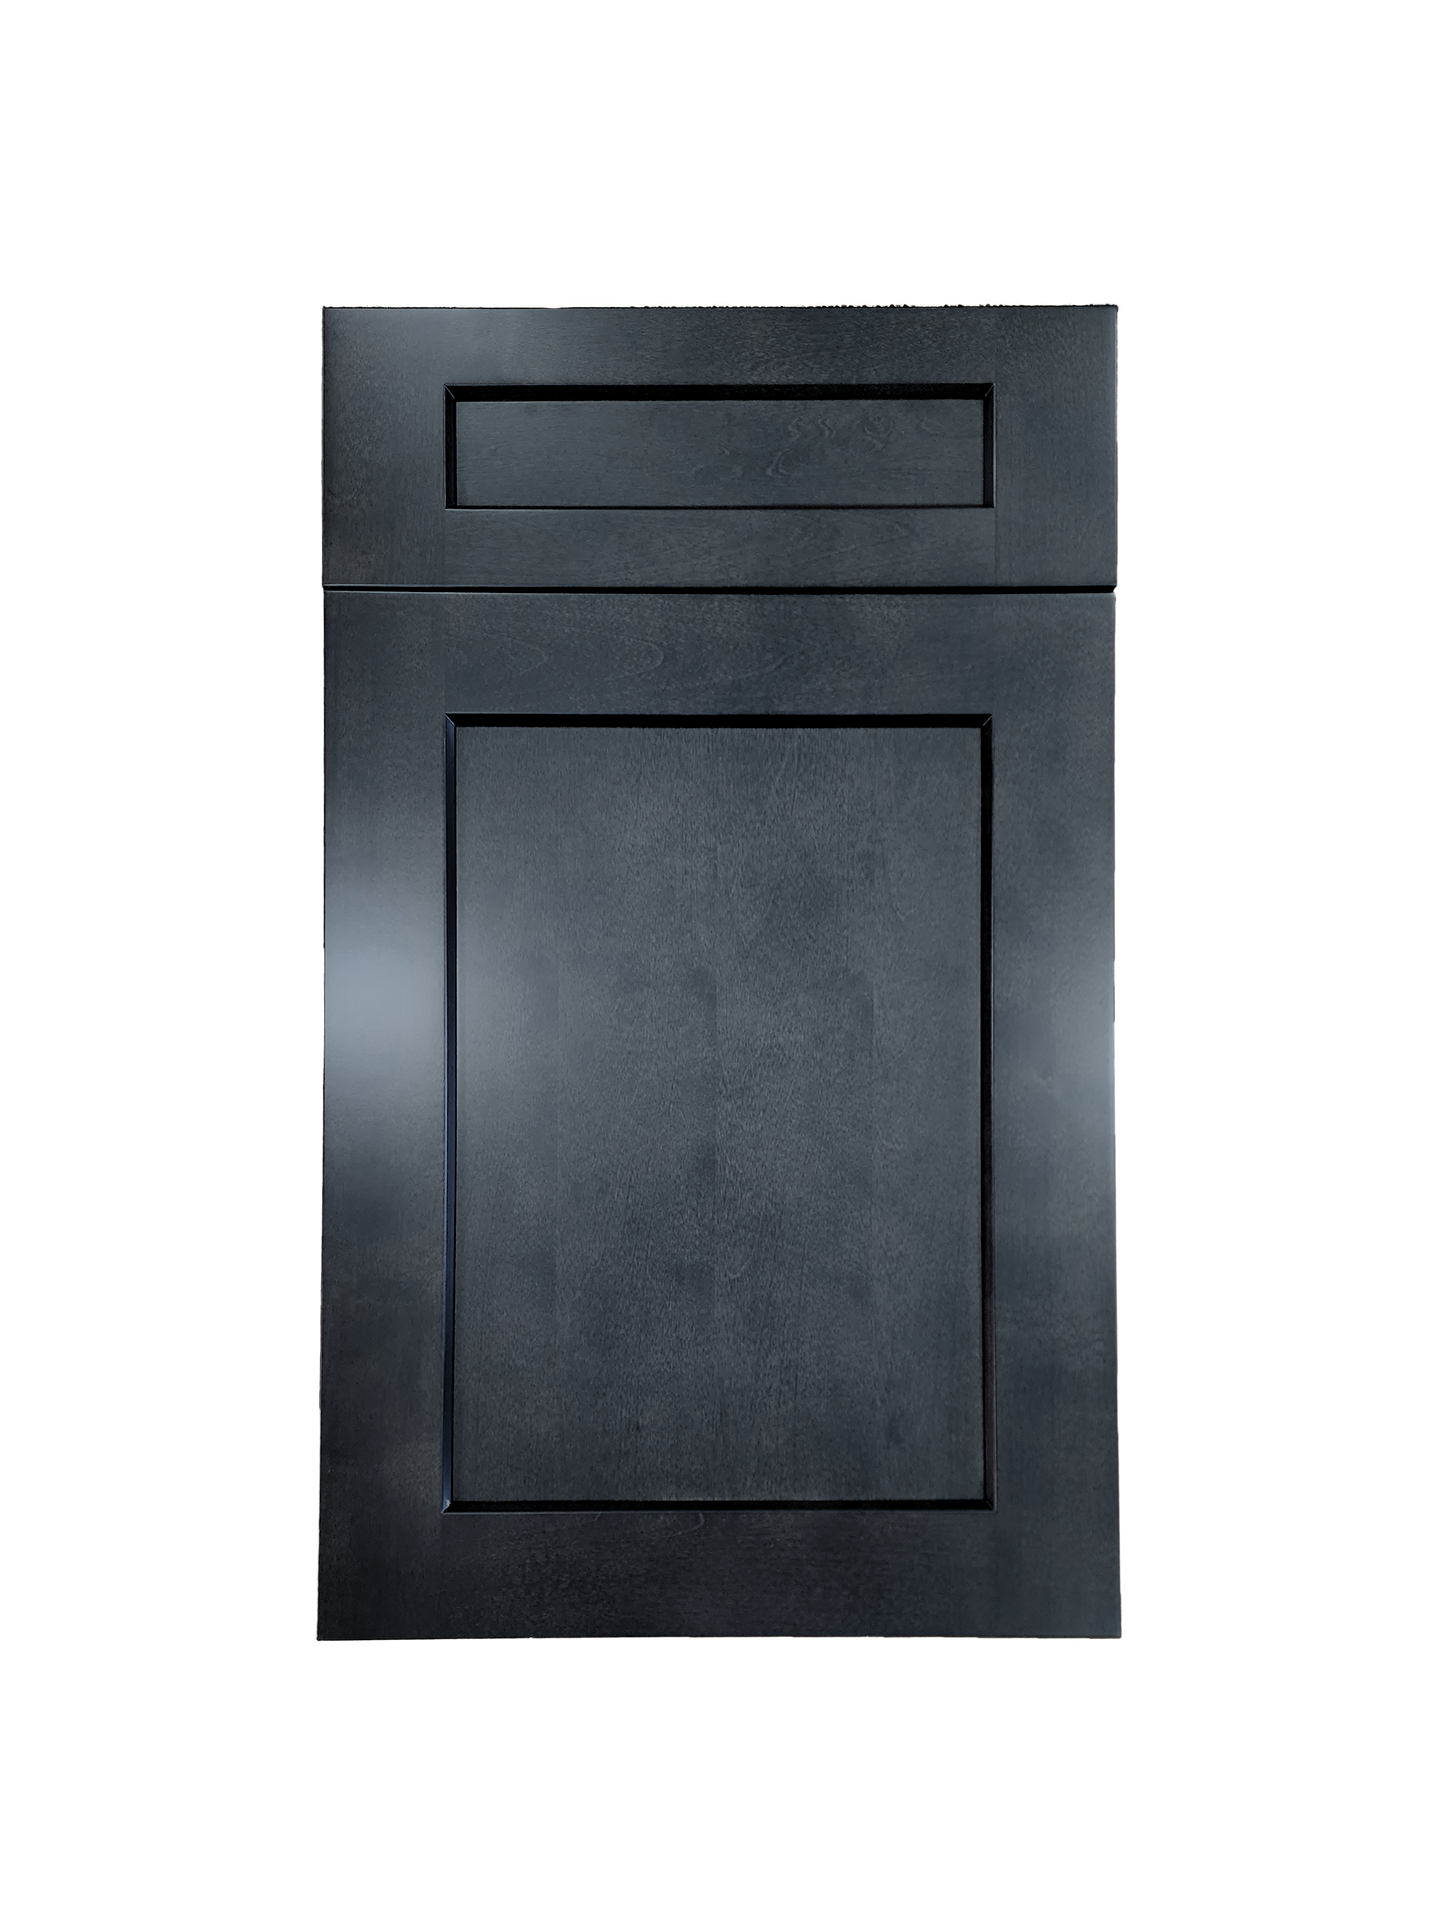 Stormy Grey Wall Cabinet 18 inches wide 12 inches deep 42 inches tall with Stormy Grey box and Stormy Grey doors